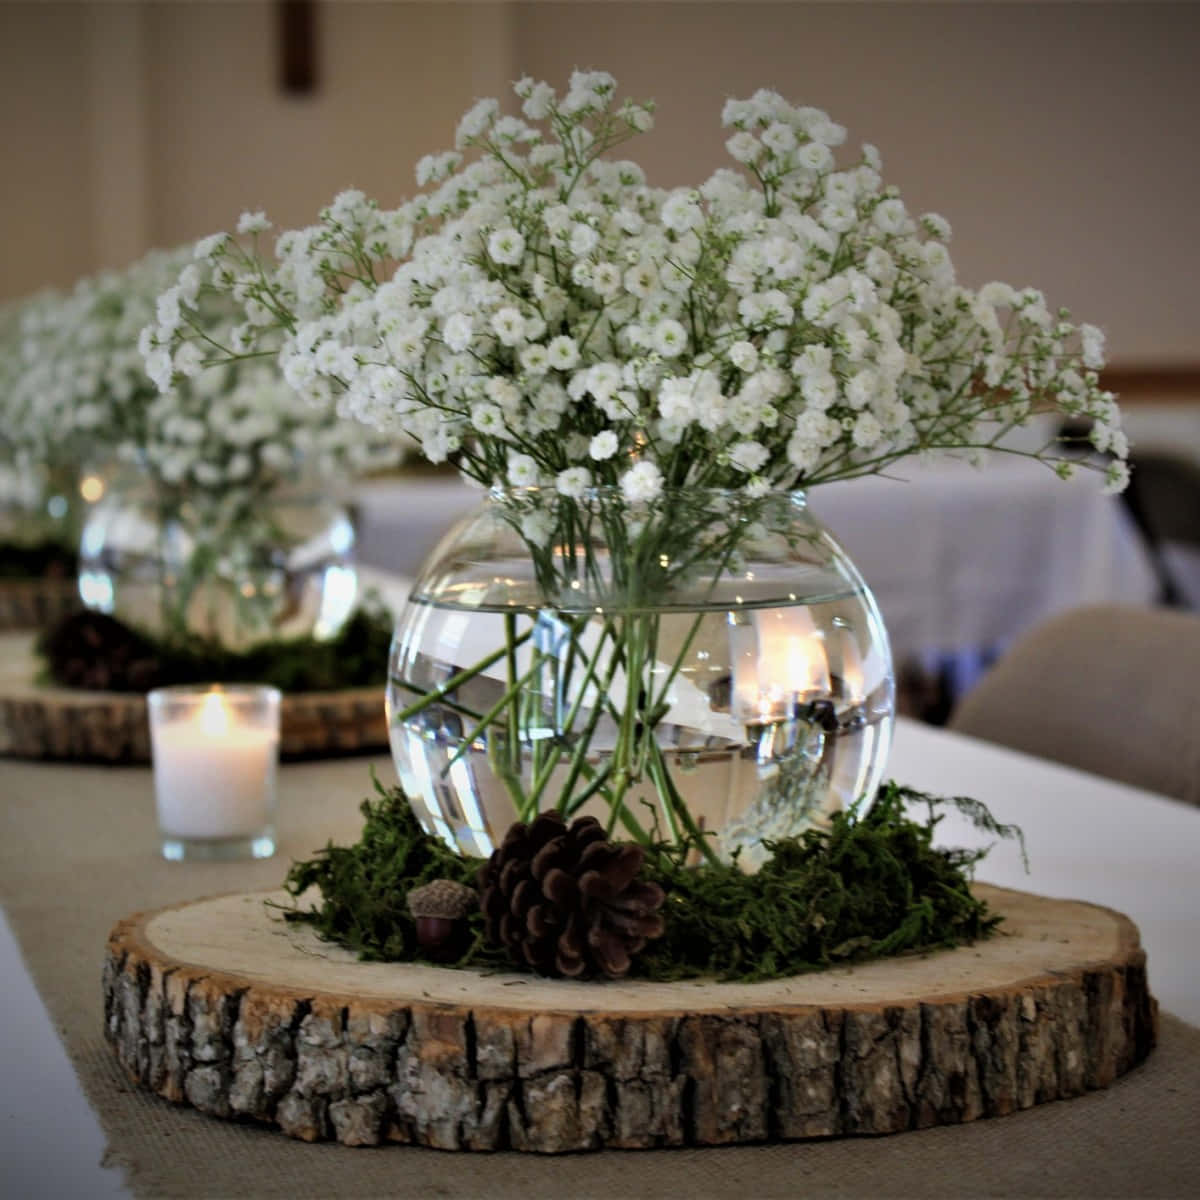 Add charm and luxury to any gathering with this elegant centerpieces. Wallpaper